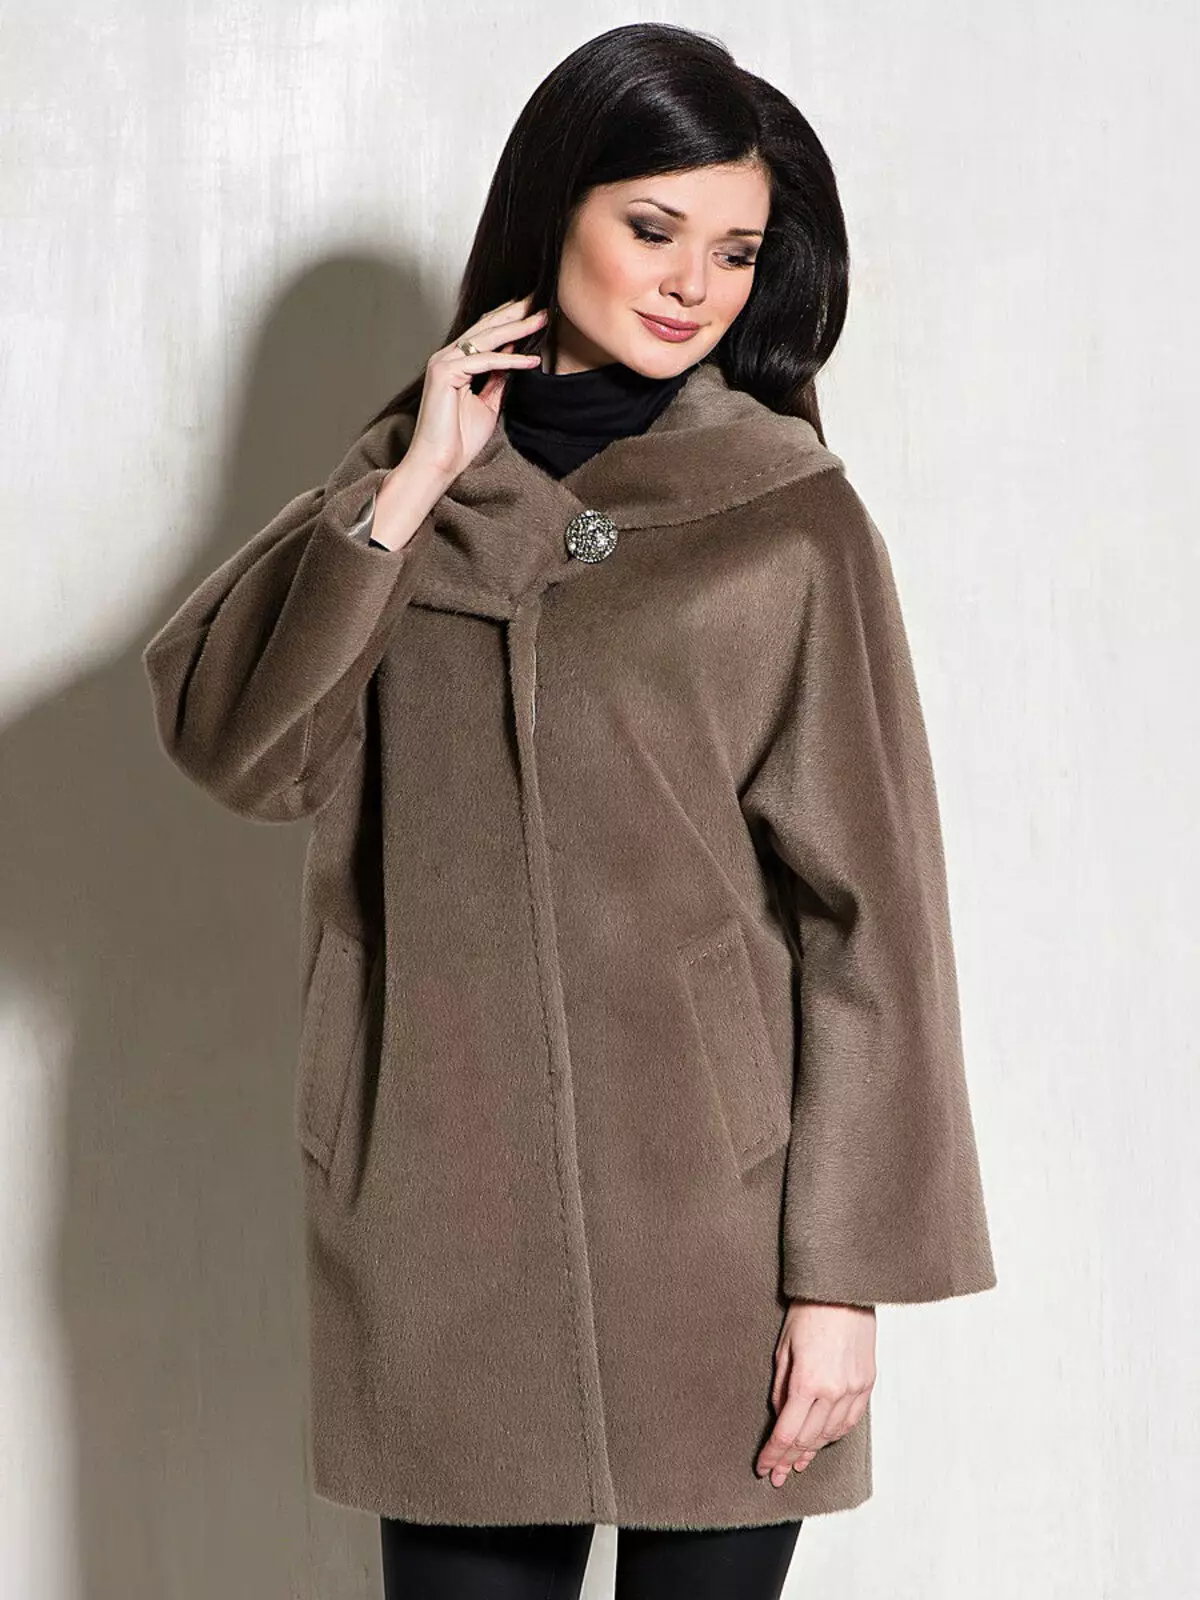 Winter Women's Coat (384 photos): Fashionable 2021 on Sintepsum, Hooded, Youth, Woolen, For Pregnant, Coat Down 643_245